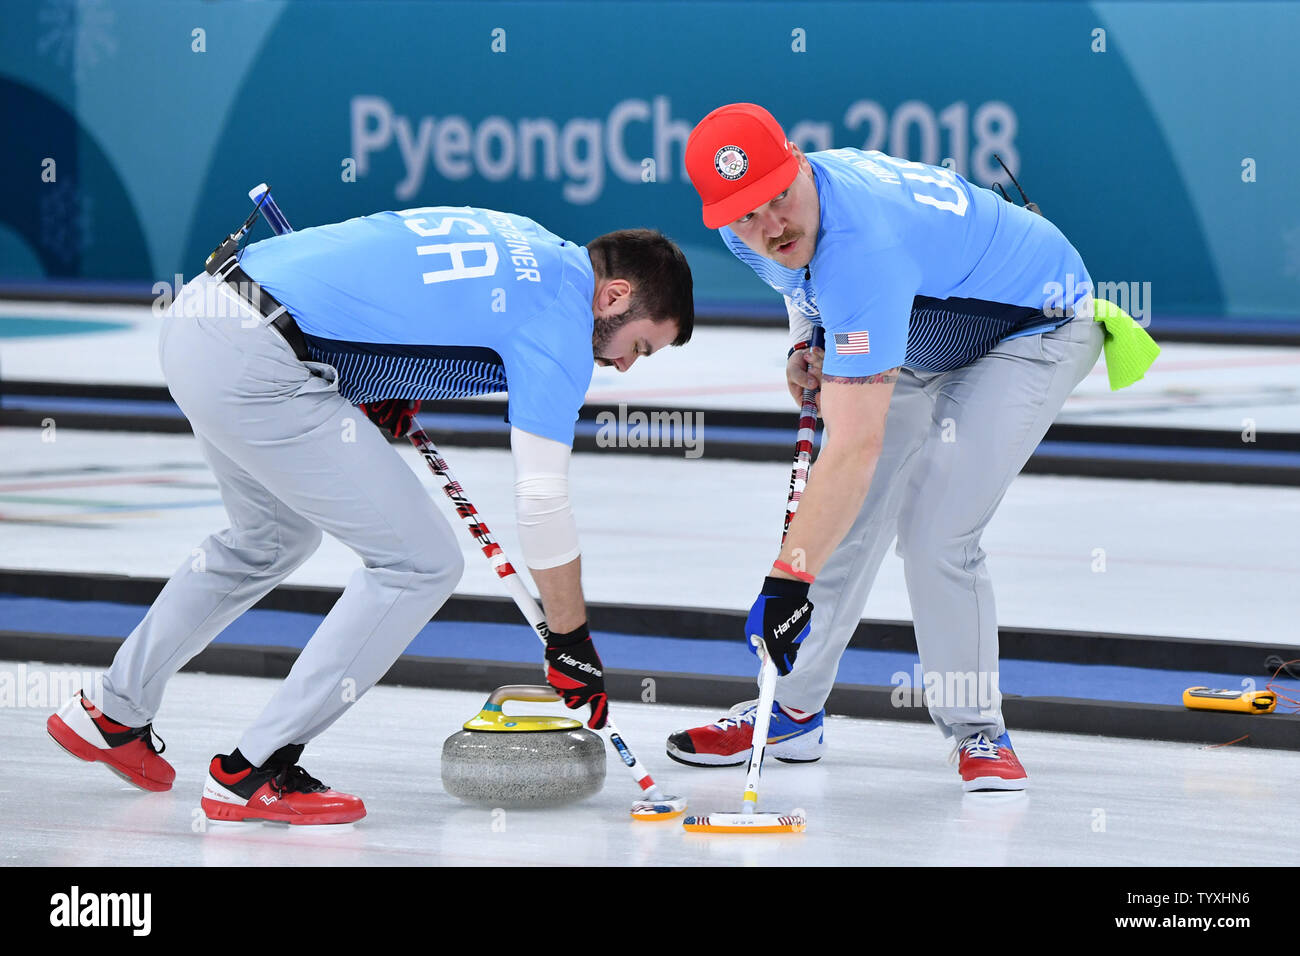 Matt Hamilton, right, and John Landsteiner of the United States sweep ahead of the stone during the Men's Curling finals at the Pyeongchang 2018 Winter Olympics, in the Gangneung Curling Centre in Gangneung, South Korea, on February 24, 2018. The USA won the gold medal for the first time beating Sweden who took the silver and Switzerland the bronze. Photo by Richard Ellis/UPI Stock Photo